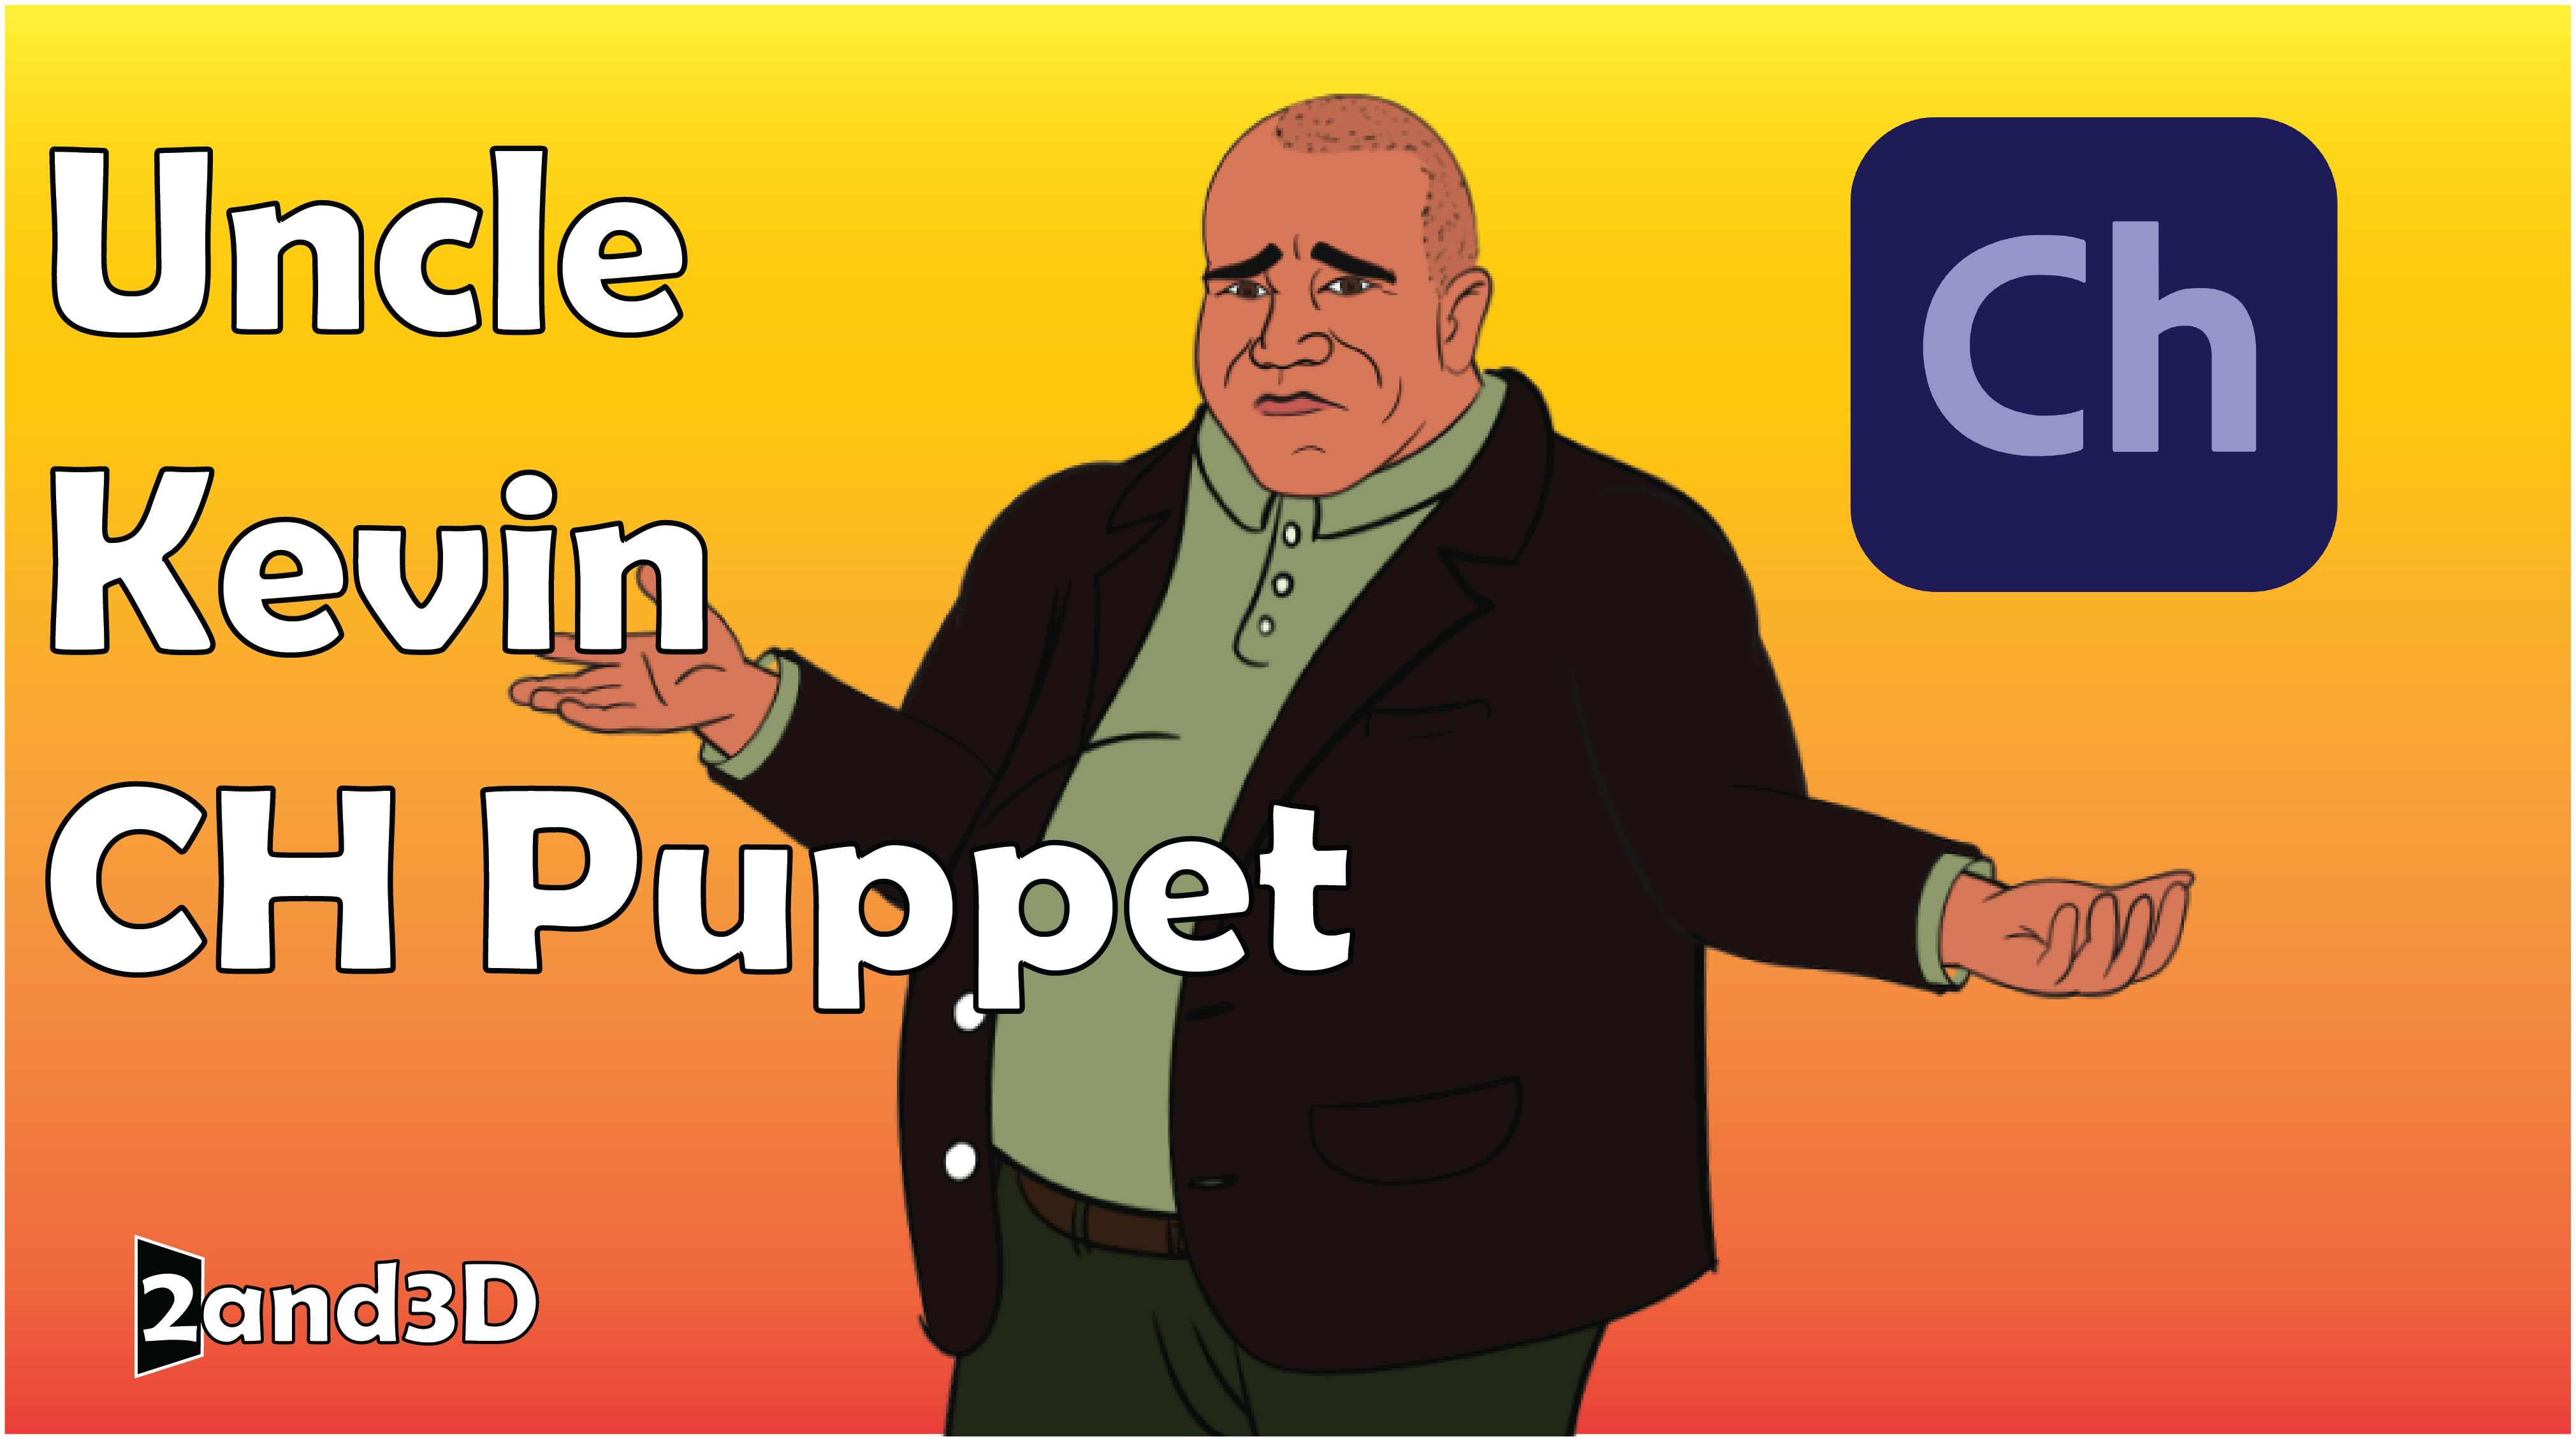 Uncle Kevin Adobe CH Puppet (Adobe Character Animator Puppet) Adobe Character Animator Puppet Adobe Ch Puppet